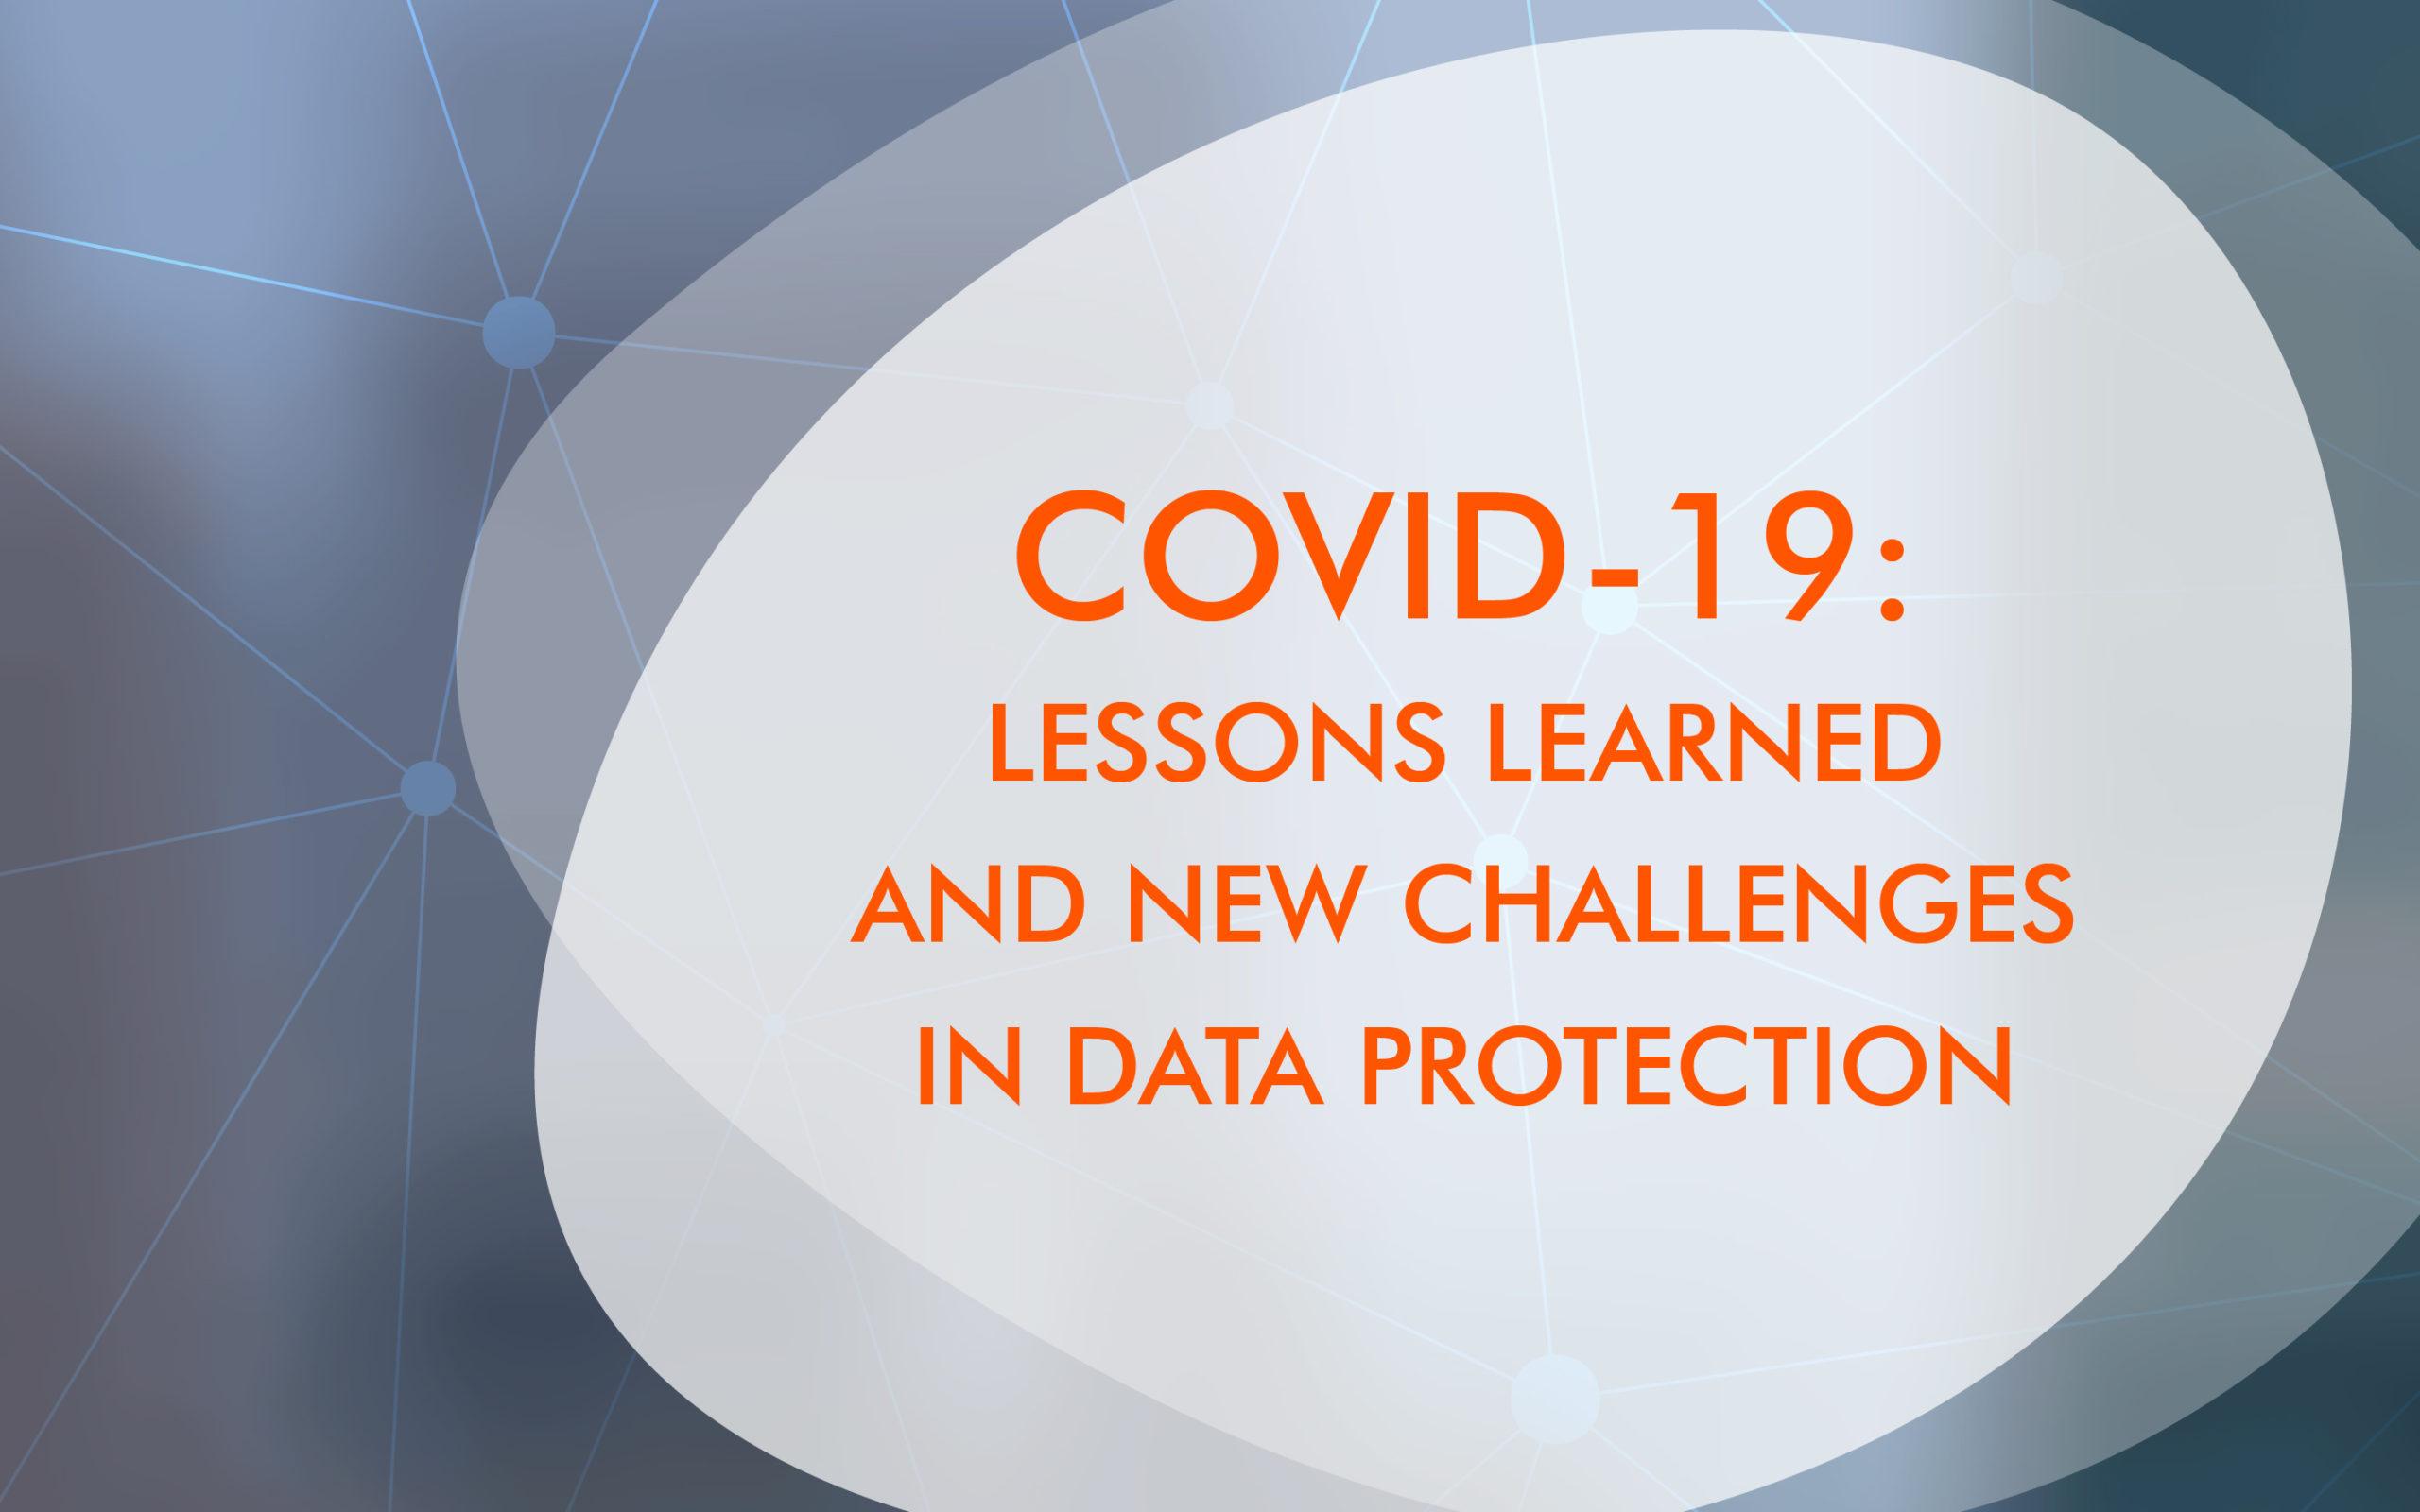 COVID-19: LESSONS LEARNED and NEW CHALLENGES IN DATA PROTECTION